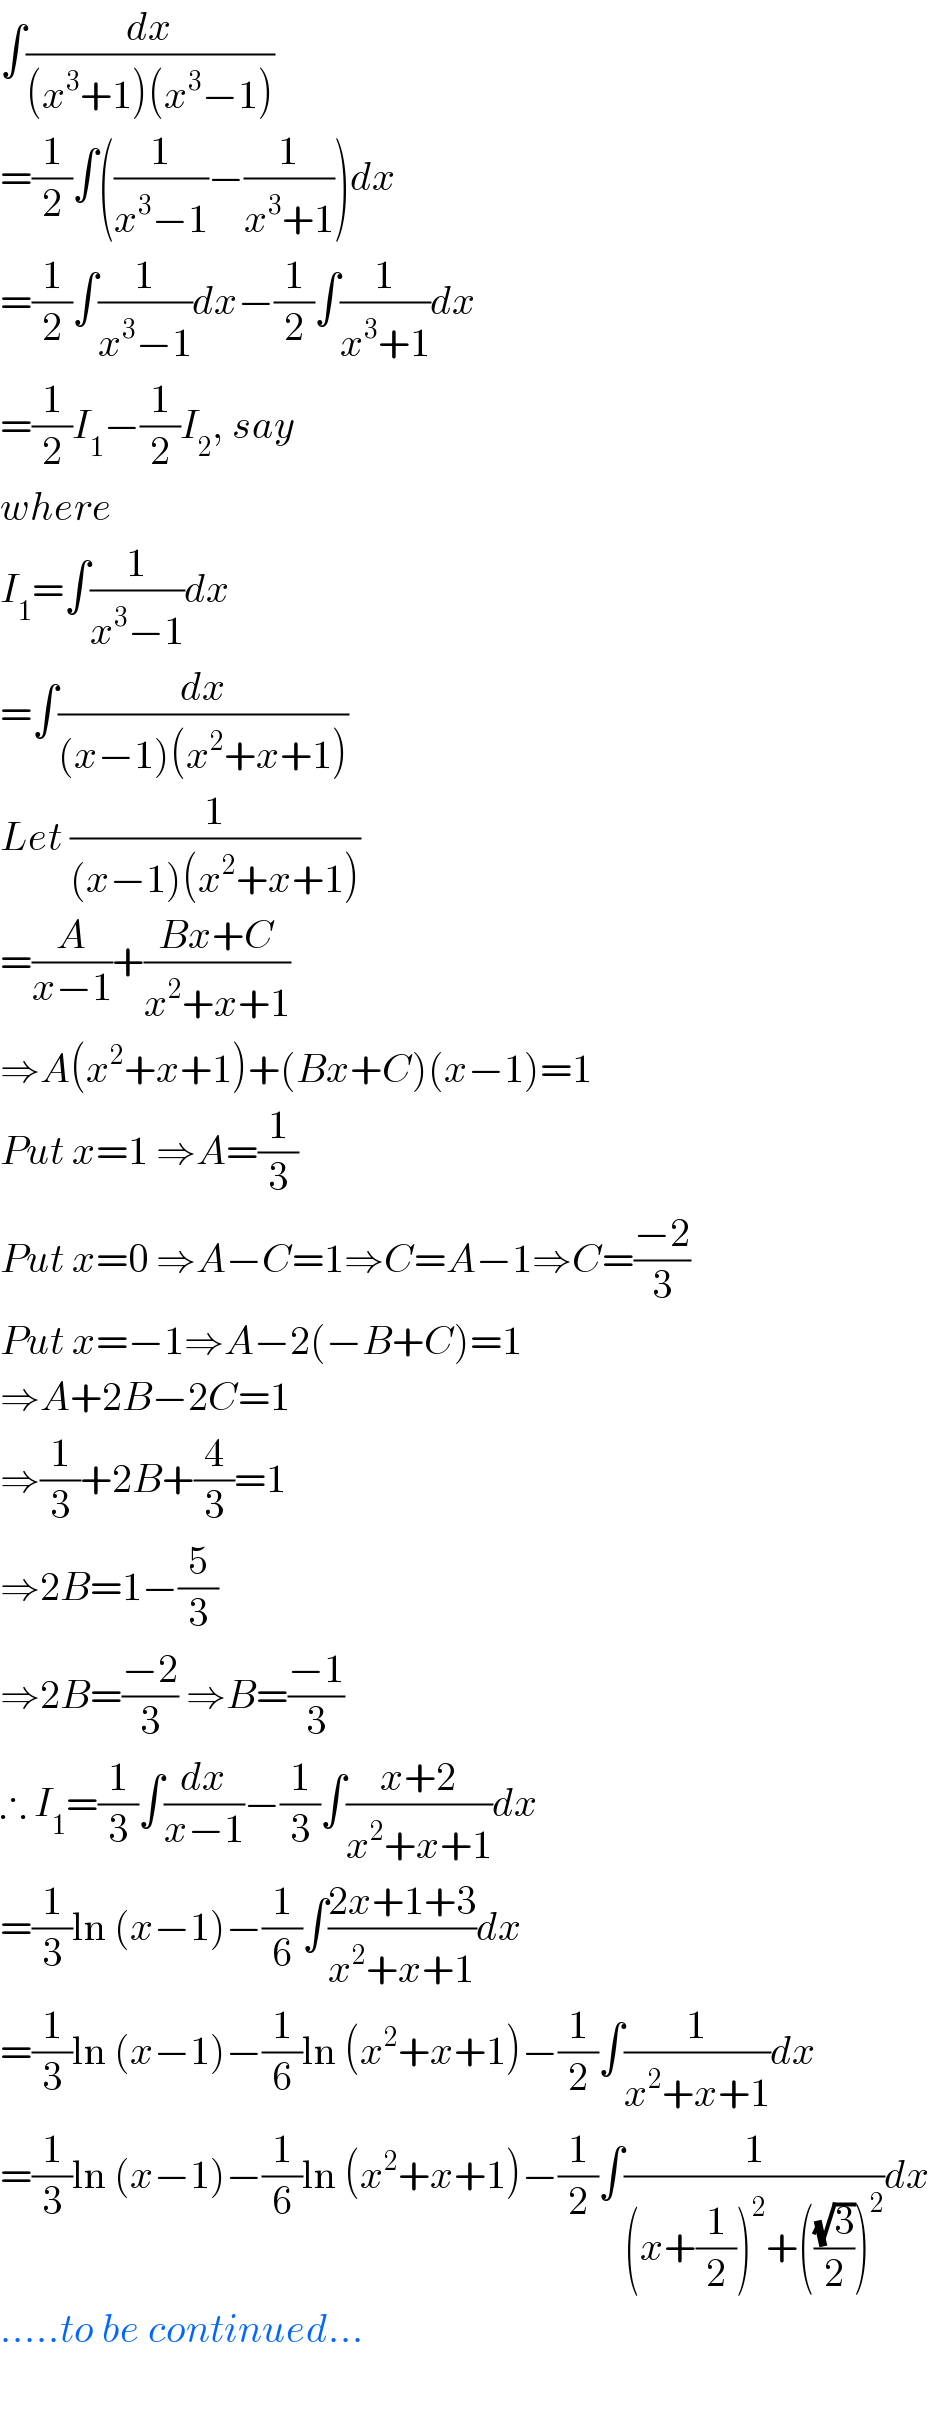 ∫(dx/((x^3 +1)(x^3 −1)))  =(1/2)∫((1/(x^3 −1))−(1/(x^3 +1)))dx  =(1/2)∫(1/(x^3 −1))dx−(1/2)∫(1/(x^3 +1))dx  =(1/2)I_1 −(1/2)I_2 , say  where  I_1 =∫(1/(x^3 −1))dx  =∫(dx/((x−1)(x^2 +x+1)))  Let (1/((x−1)(x^2 +x+1)))  =(A/(x−1))+((Bx+C)/(x^2 +x+1))  ⇒A(x^2 +x+1)+(Bx+C)(x−1)=1  Put x=1 ⇒A=(1/3)  Put x=0 ⇒A−C=1⇒C=A−1⇒C=((−2)/3)  Put x=−1⇒A−2(−B+C)=1  ⇒A+2B−2C=1  ⇒(1/3)+2B+(4/3)=1  ⇒2B=1−(5/3)  ⇒2B=((−2)/3) ⇒B=((−1)/3)  ∴ I_1 =(1/3)∫(dx/(x−1))−(1/3)∫((x+2)/(x^2 +x+1))dx  =(1/3)ln (x−1)−(1/6)∫((2x+1+3)/(x^2 +x+1))dx  =(1/3)ln (x−1)−(1/6)ln (x^2 +x+1)−(1/2)∫(1/(x^2 +x+1))dx  =(1/3)ln (x−1)−(1/6)ln (x^2 +x+1)−(1/2)∫(1/((x+(1/2))^2 +(((√3)/2))^2 ))dx  .....to be continued...    